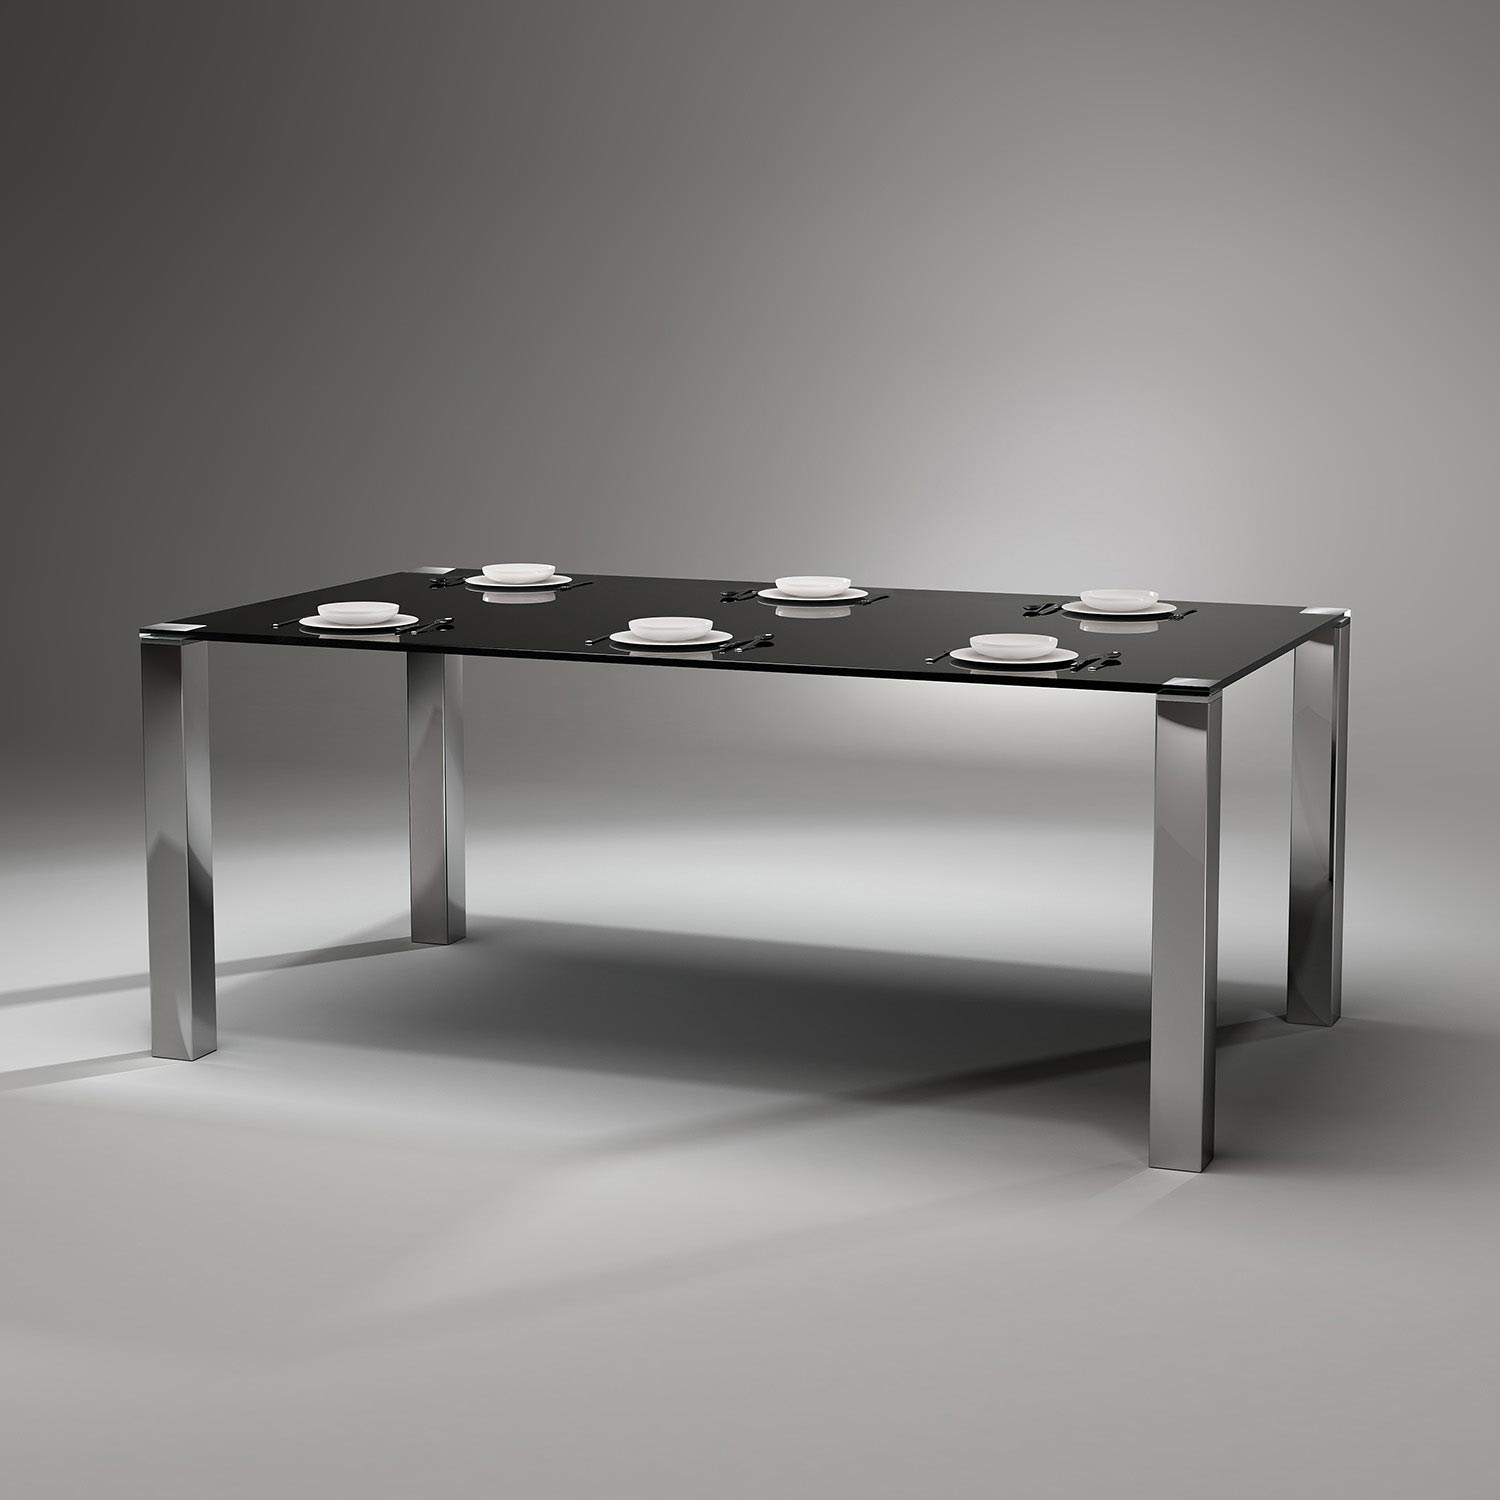 Glass dining table QUADRO magnum by DREIECK DESIGN: QM 2072 - FLOATGLASS color jet black - table feet stainless steel polished